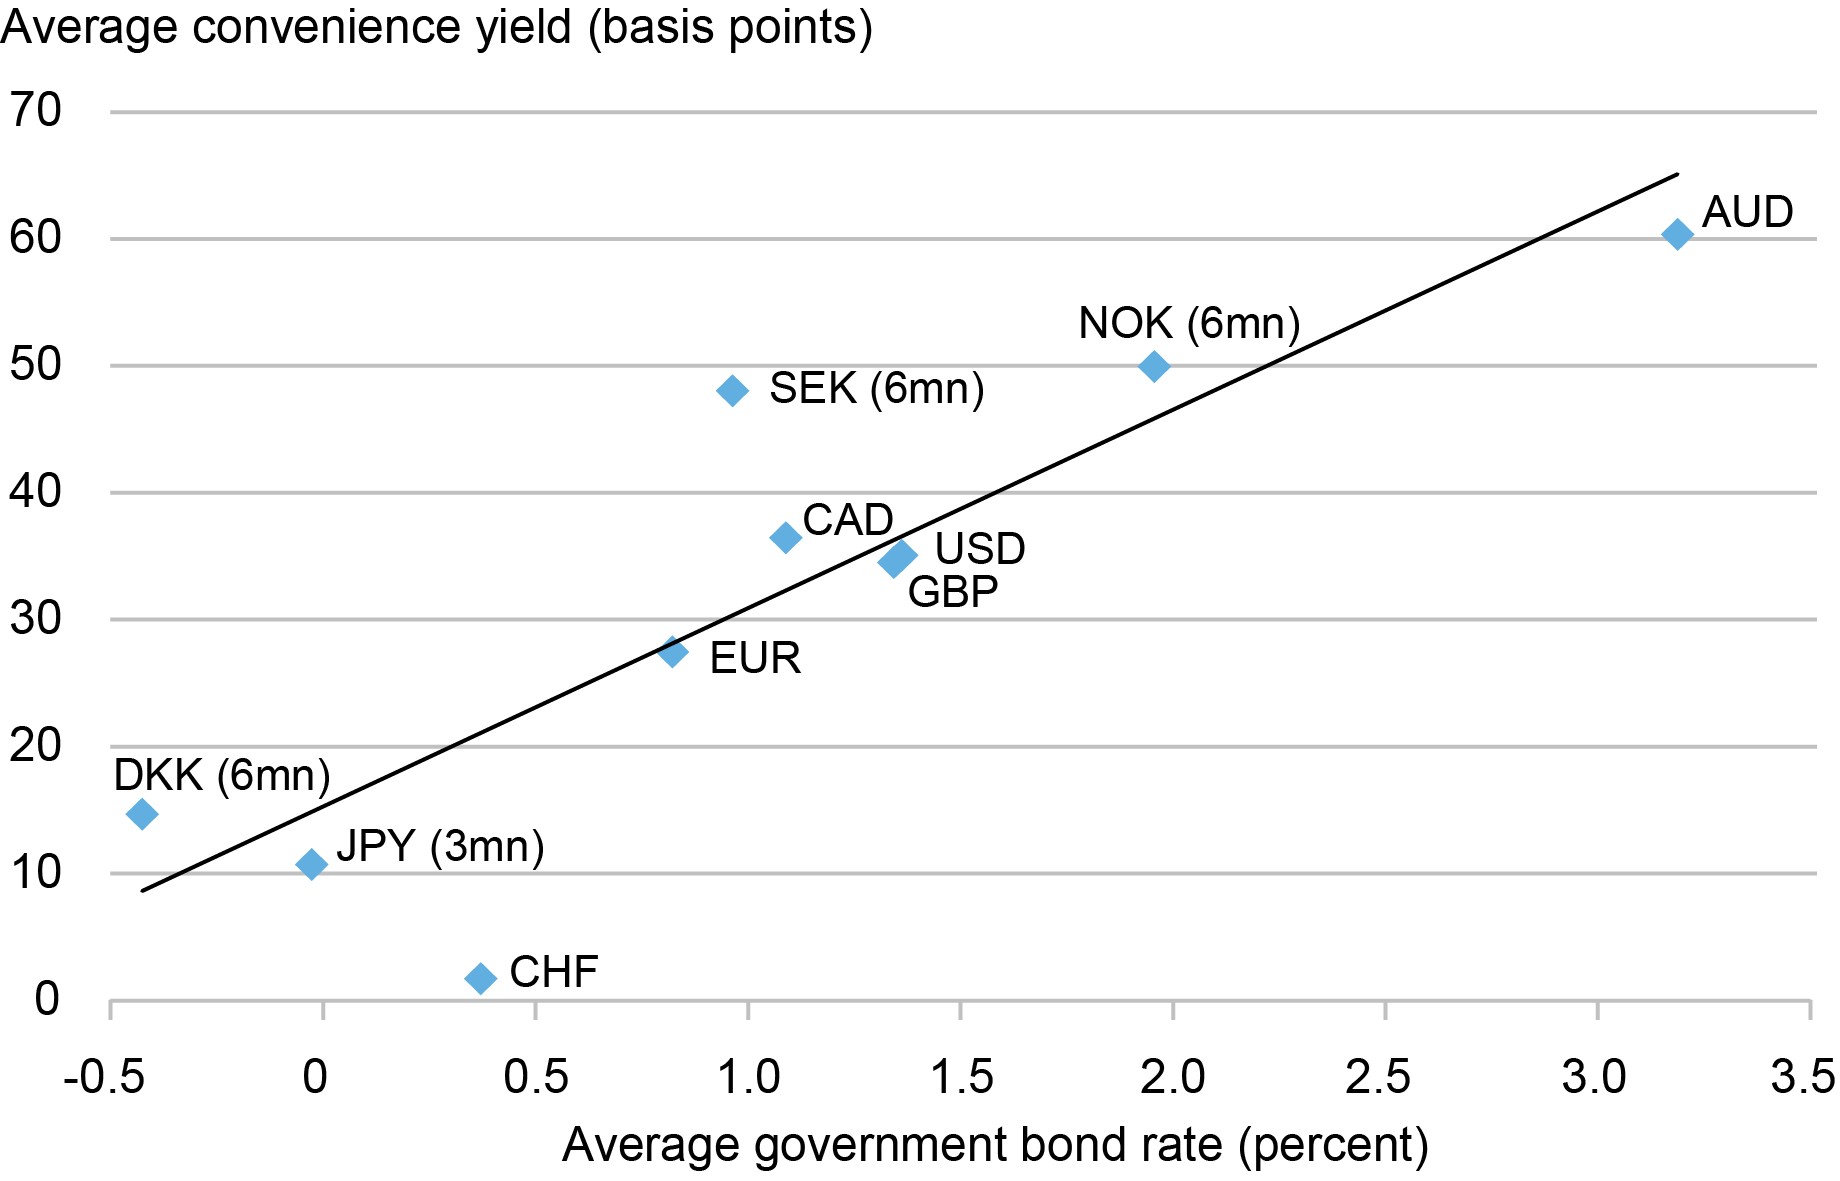 Liberty Street Economics scatter plot showing that countries with higher interest rates have higher convenience yields. The chart plots the average convenience yield (in basis points) against average government bond rate (in percentage terms) for the available sample period for each currency reported.